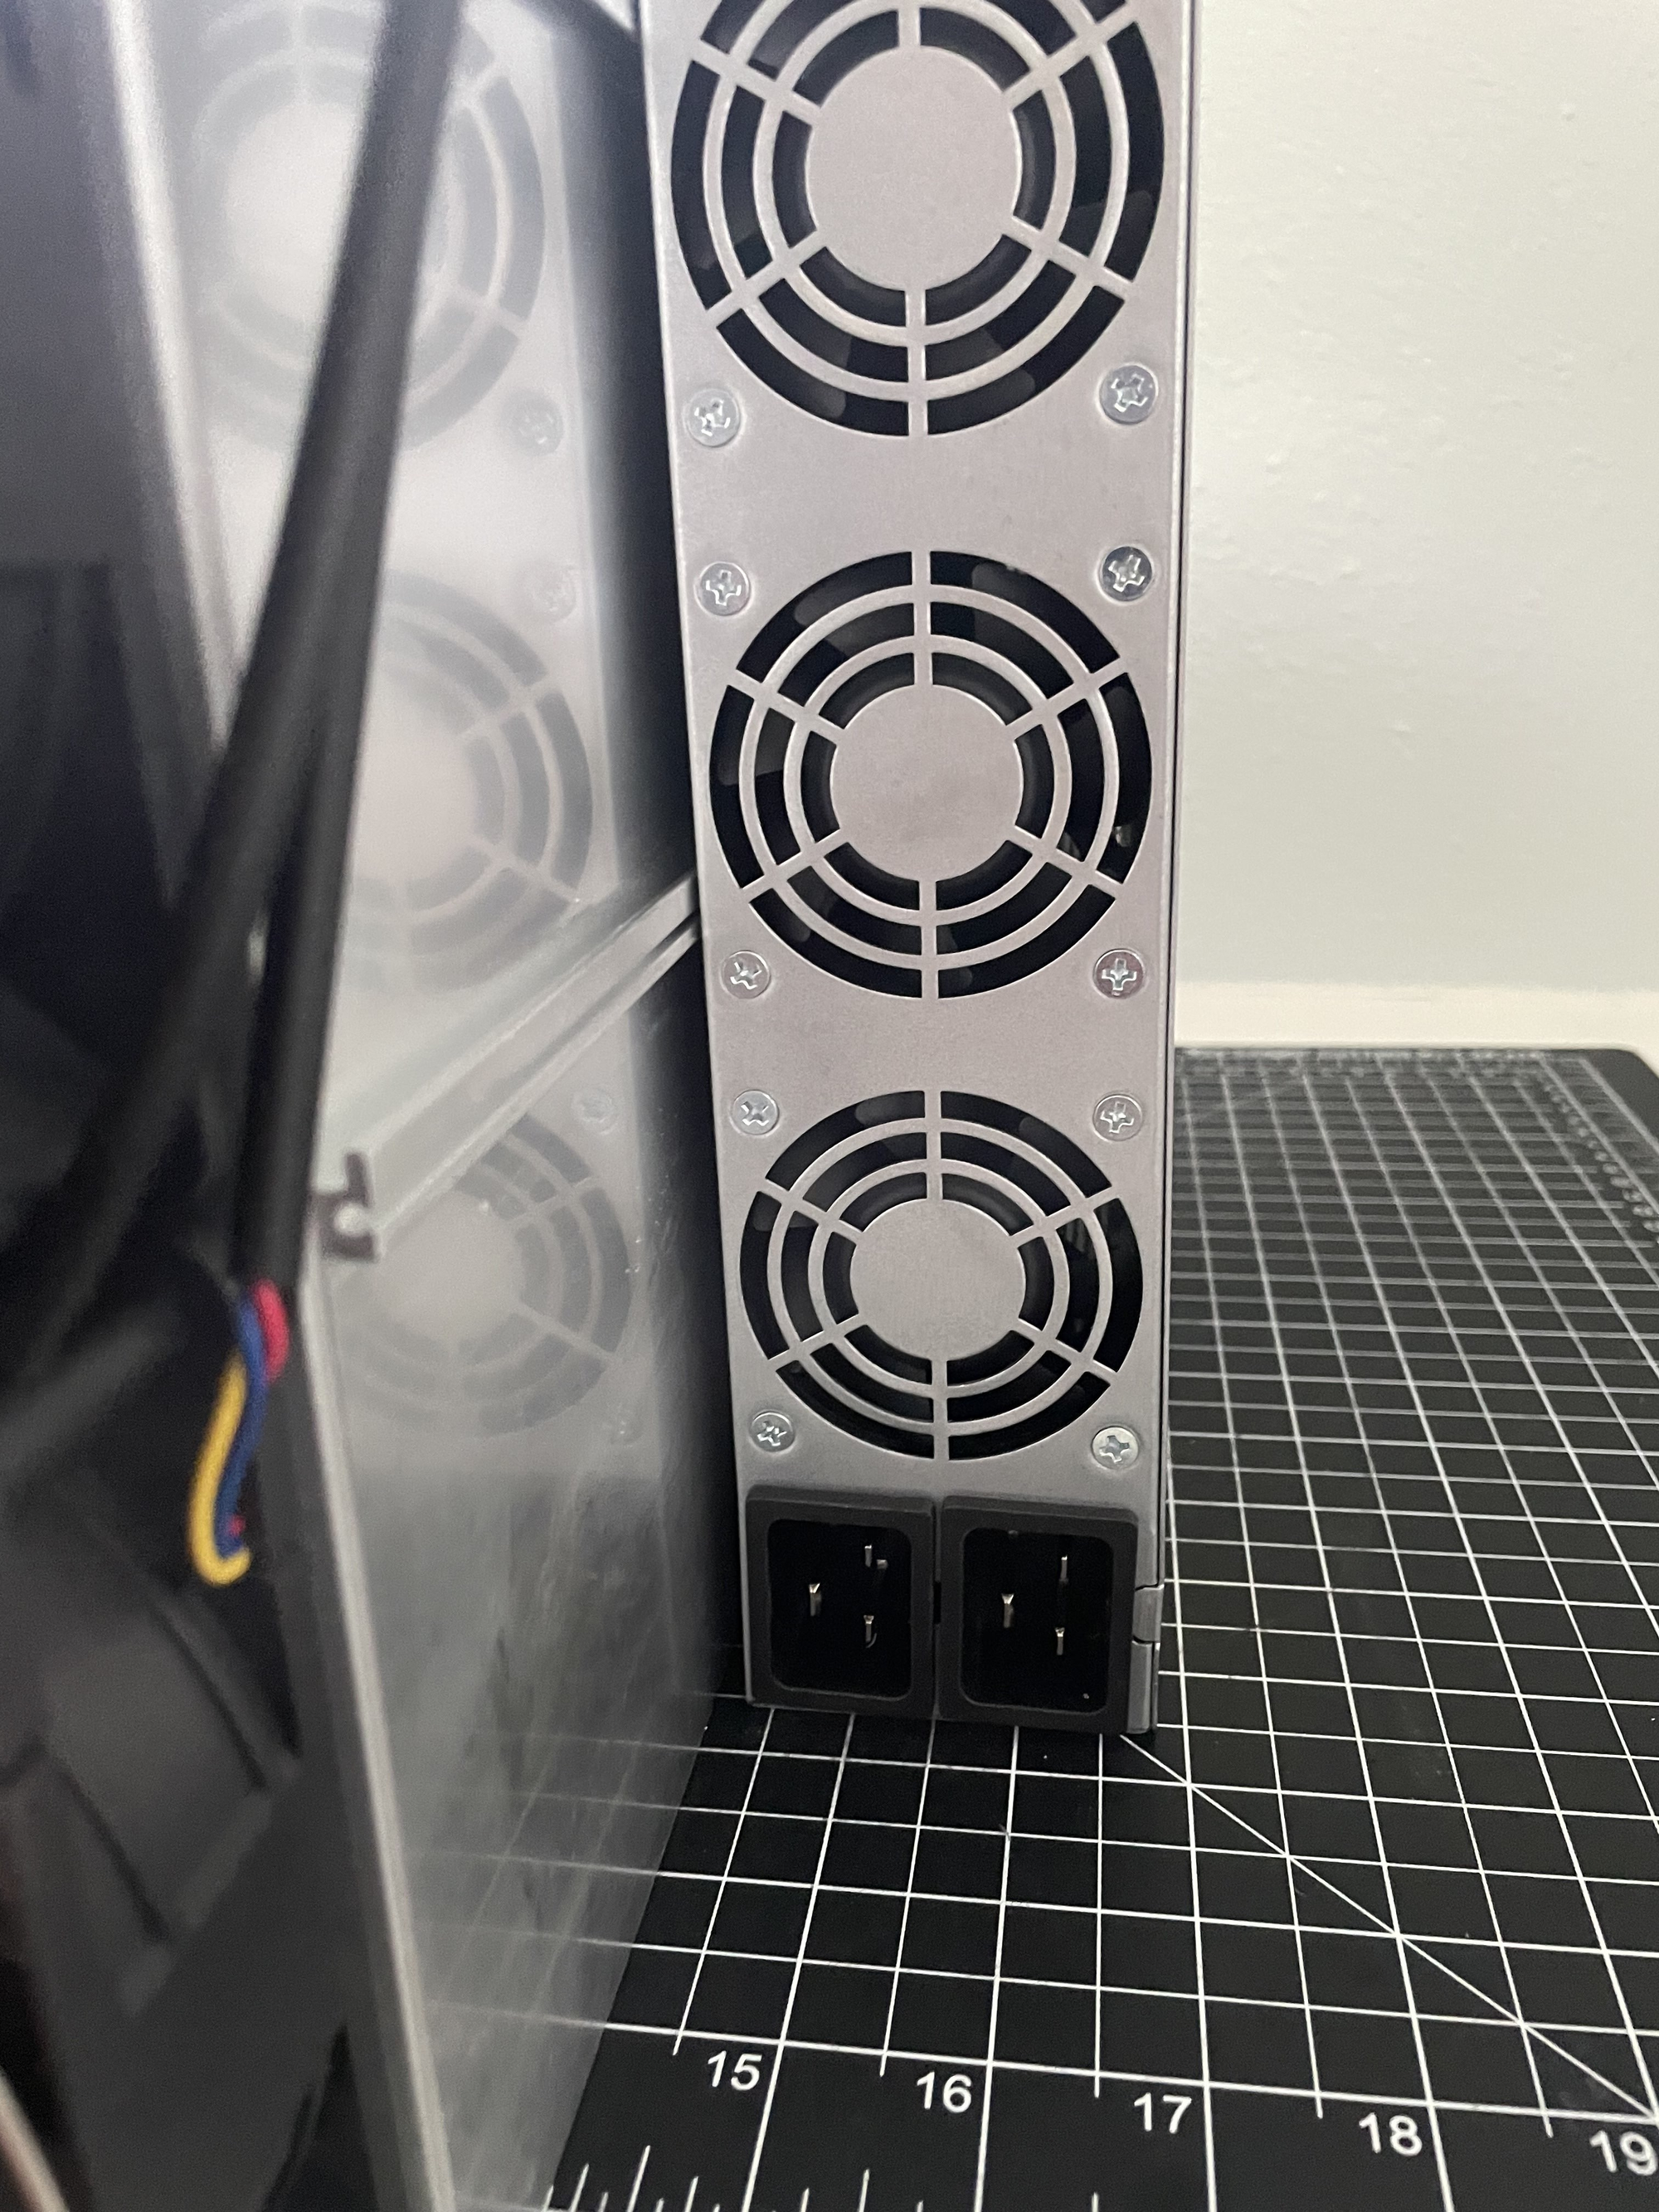 ElphaPex DG1 and DG1+ ASIC Miner Testing and Review